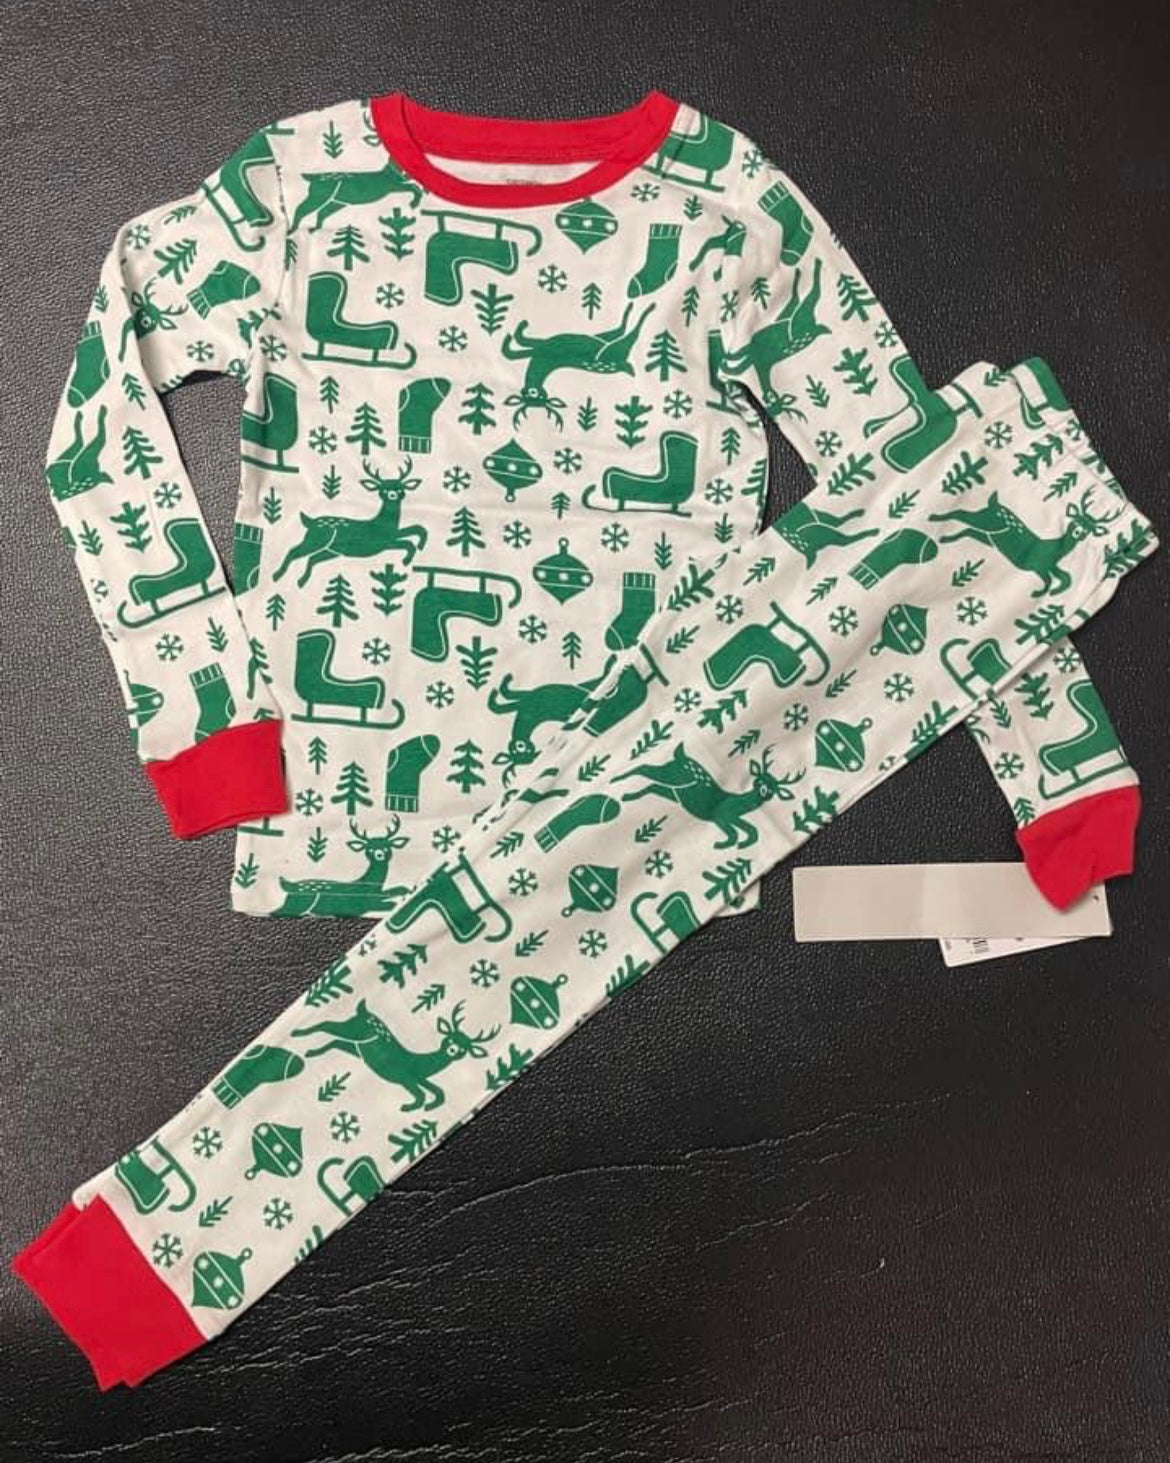 New size 6 Carters Christmas PJs.